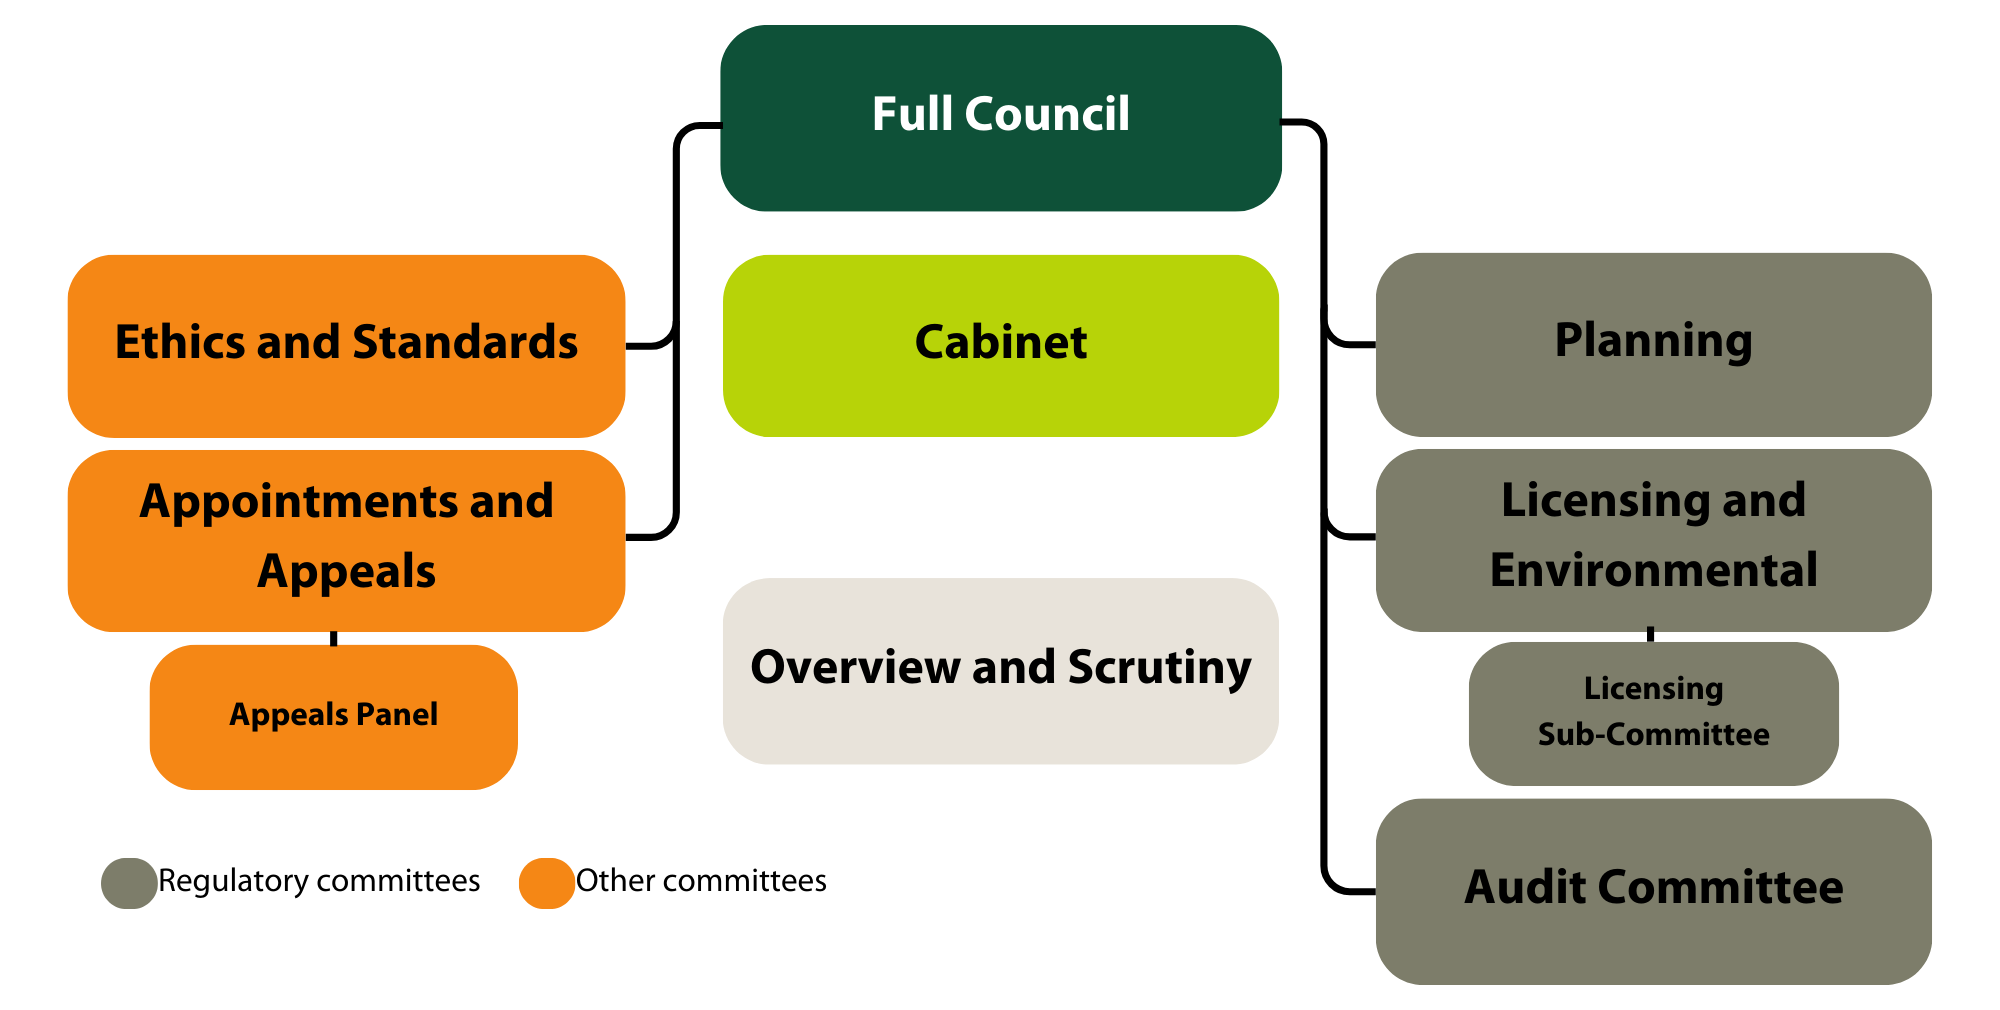 Structure chart showing committees in relation to Full Council as detailed in text below